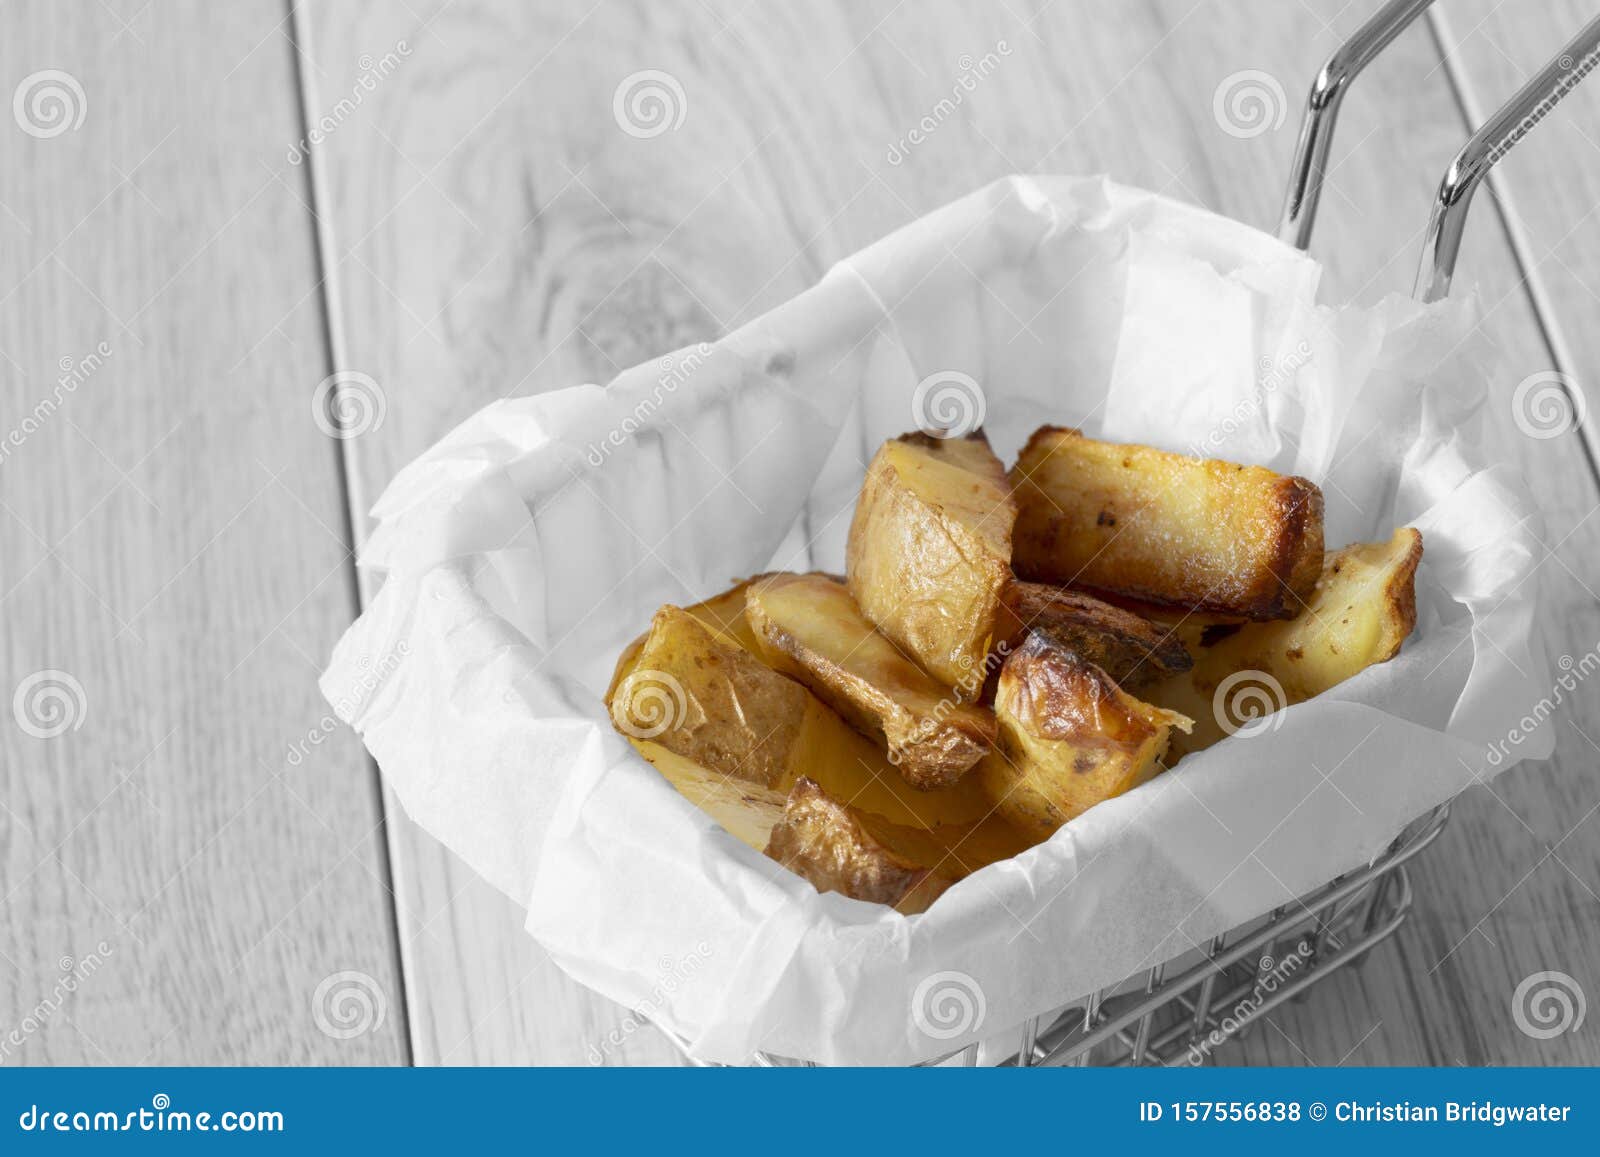 potato wedges chips in a wire mesh serving basket with greaseproof paper.